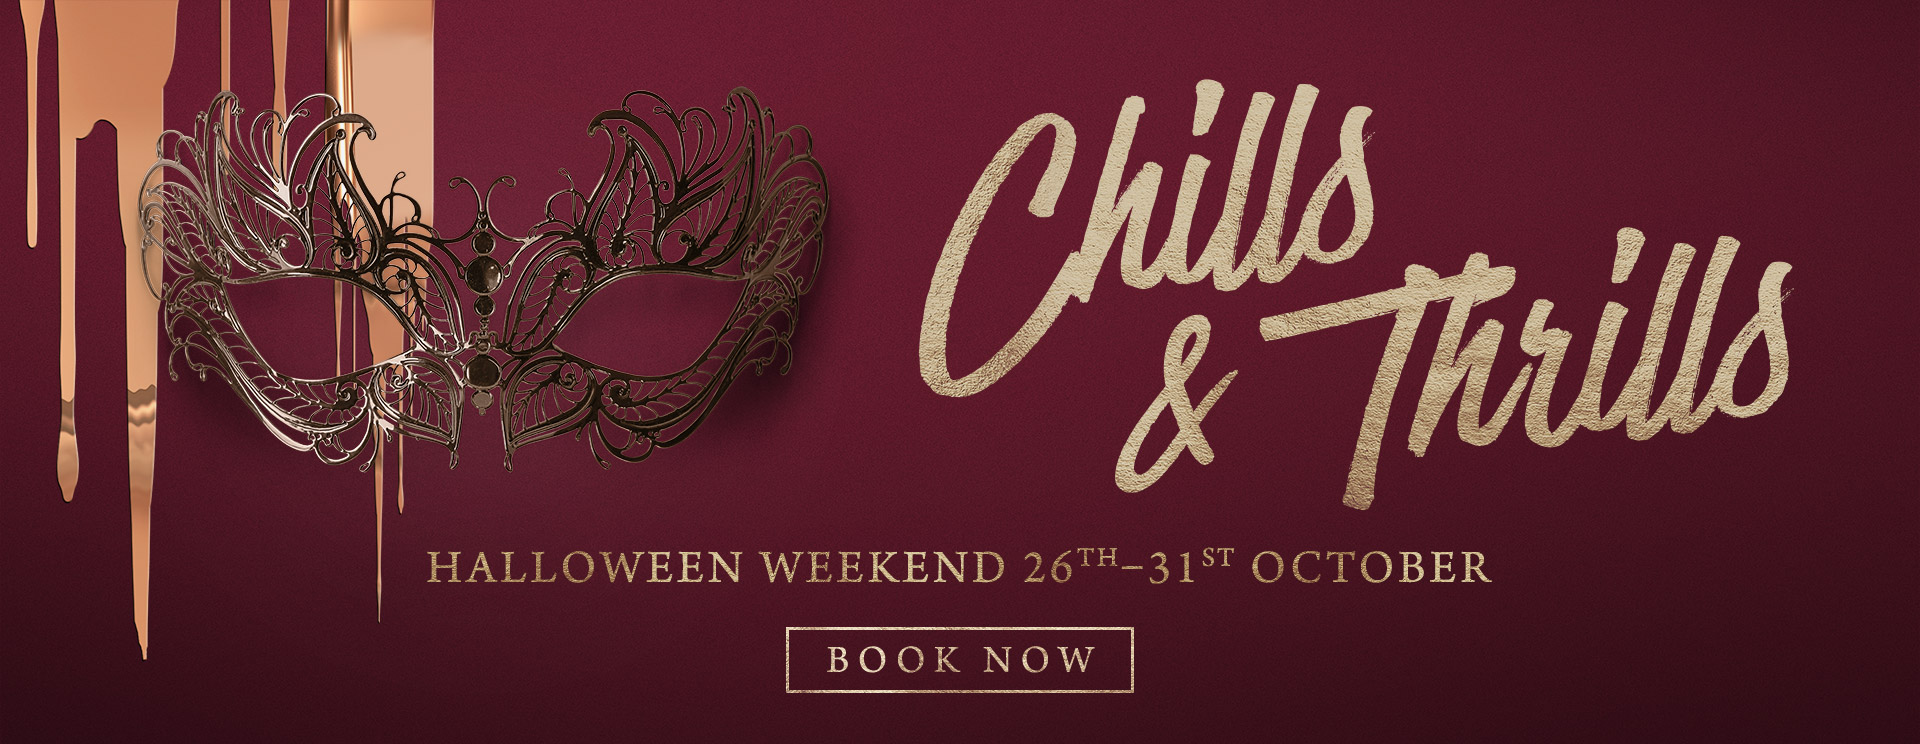 Chills & Thrills this Halloween at The Bell Inn